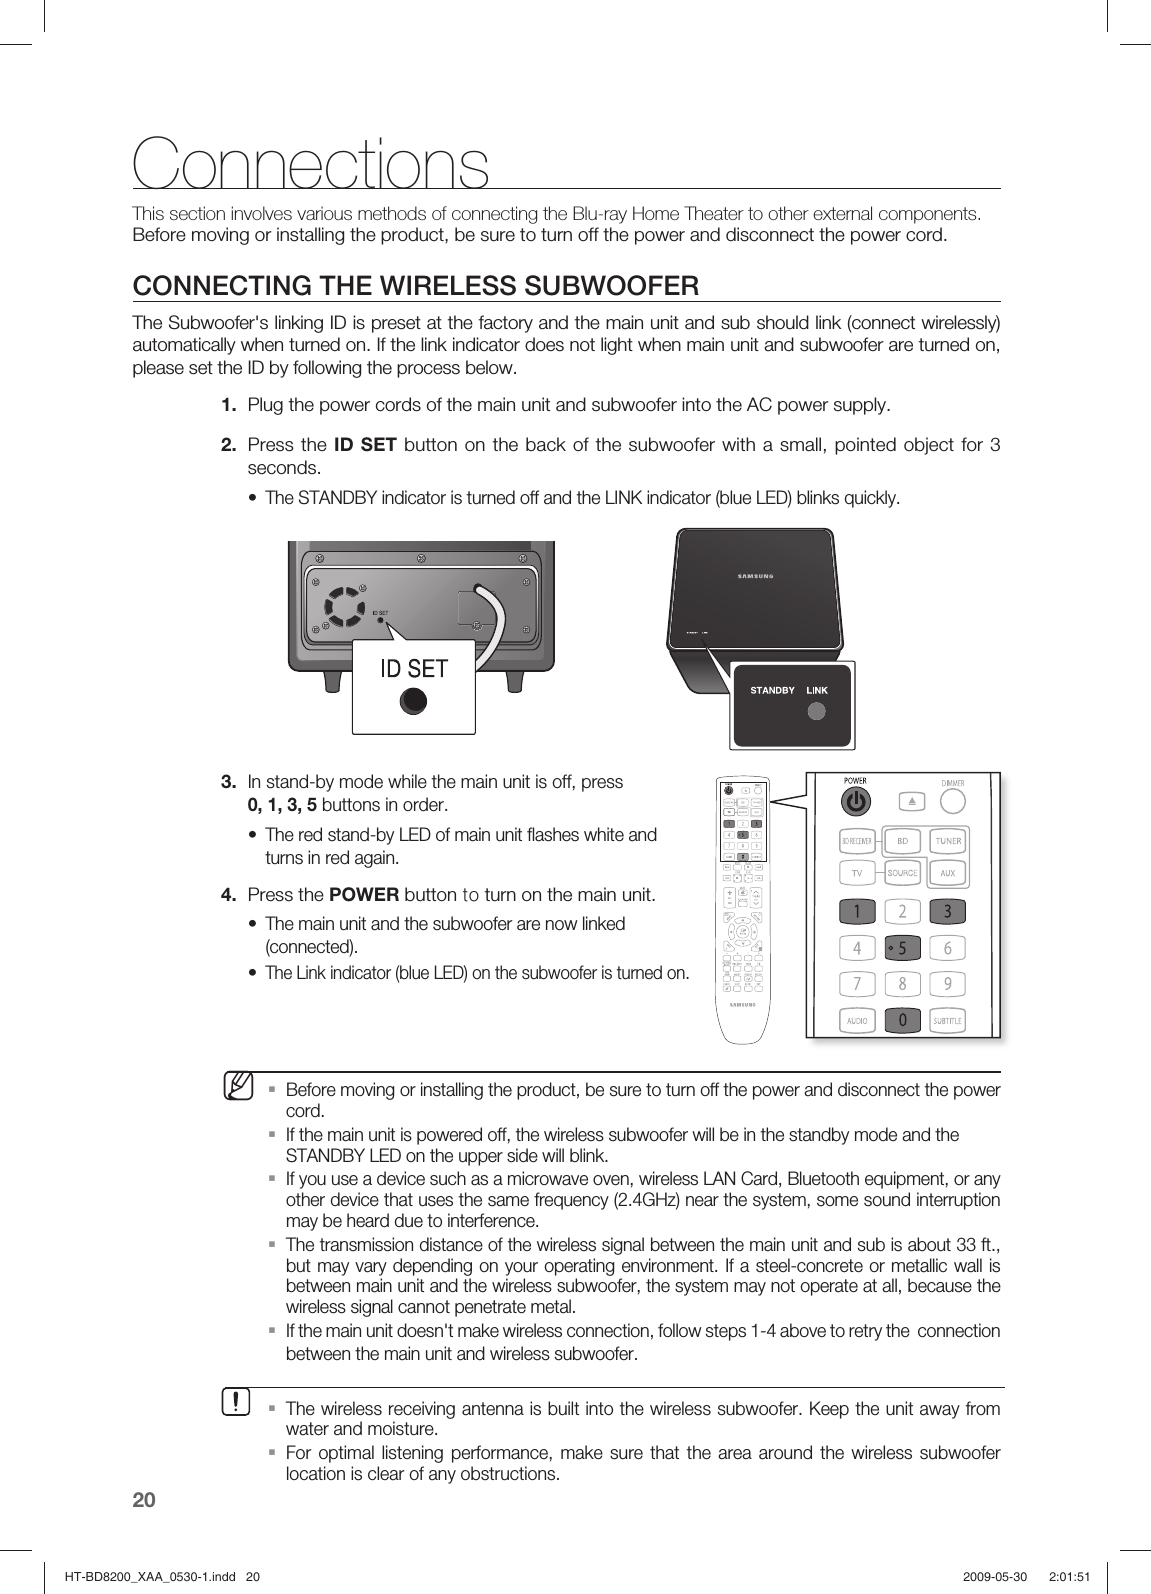 20ConnectionsThis section involves various methods of connecting the Blu-ray Home Theater to other external components. Before moving or installing the product, be sure to turn off the power and disconnect the power cord.CONNECTING THE WIRELESS SUBWOOFERThe Subwoofer&apos;s linking ID is preset at the factory and the main unit and sub should link (connect wirelessly) automatically when turned on. If the link indicator does not light when main unit and subwoofer are turned on, please set the ID by following the process below. 1.  Plug the power cords of the main unit and subwoofer into the AC power supply.2.  Press the ID SET button on the back of the subwoofer with a small, pointed object for 3 seconds.The STANDBY indicator is turned off and the LINK indicator (blue LED) blinks quickly.3. In stand-by mode while the main unit is off, press 0, 1, 3, 5 buttons in order.The red stand-by LED of main unit ﬂ ashes white and turns in red again.4.  Press the POWER button to turn on the main unit.The main unit and the subwoofer are now linked (connected).The Link indicator (blue LED) on the subwoofer is turned on.Before moving or installing the product, be sure to turn off the power and disconnect the power cord.If the main unit is powered off, the wireless subwoofer will be in the standby mode and the STANDBY LED on the upper side will blink.If you use a device such as a microwave oven, wireless LAN Card, Bluetooth equipment, or any other device that uses the same frequency (2.4GHz) near the system, some sound interruption may be heard due to interference.The transmission distance of the wireless signal between the main unit and sub is about 33 ft., but may vary depending on your operating environment. If a steel-concrete or metallic wall is between main unit and the wireless subwoofer, the system may not operate at all, because the wireless signal cannot penetrate metal.If the main unit doesn&apos;t make wireless connection, follow steps 1-4 above to retry the  connection between the main unit and wireless subwoofer.••••M▪▪▪▪▪The wireless receiving antenna is built into the wireless subwoofer. Keep the unit away from water and moisture.For optimal listening performance, make sure that the area around the wireless subwoofer location is clear of any obstructions.▪▪HT-BD8200_XAA_0530-1.indd   20HT-BD8200_XAA_0530-1.indd   20 2009-05-30    2:01:512009-05-30    2:01:51